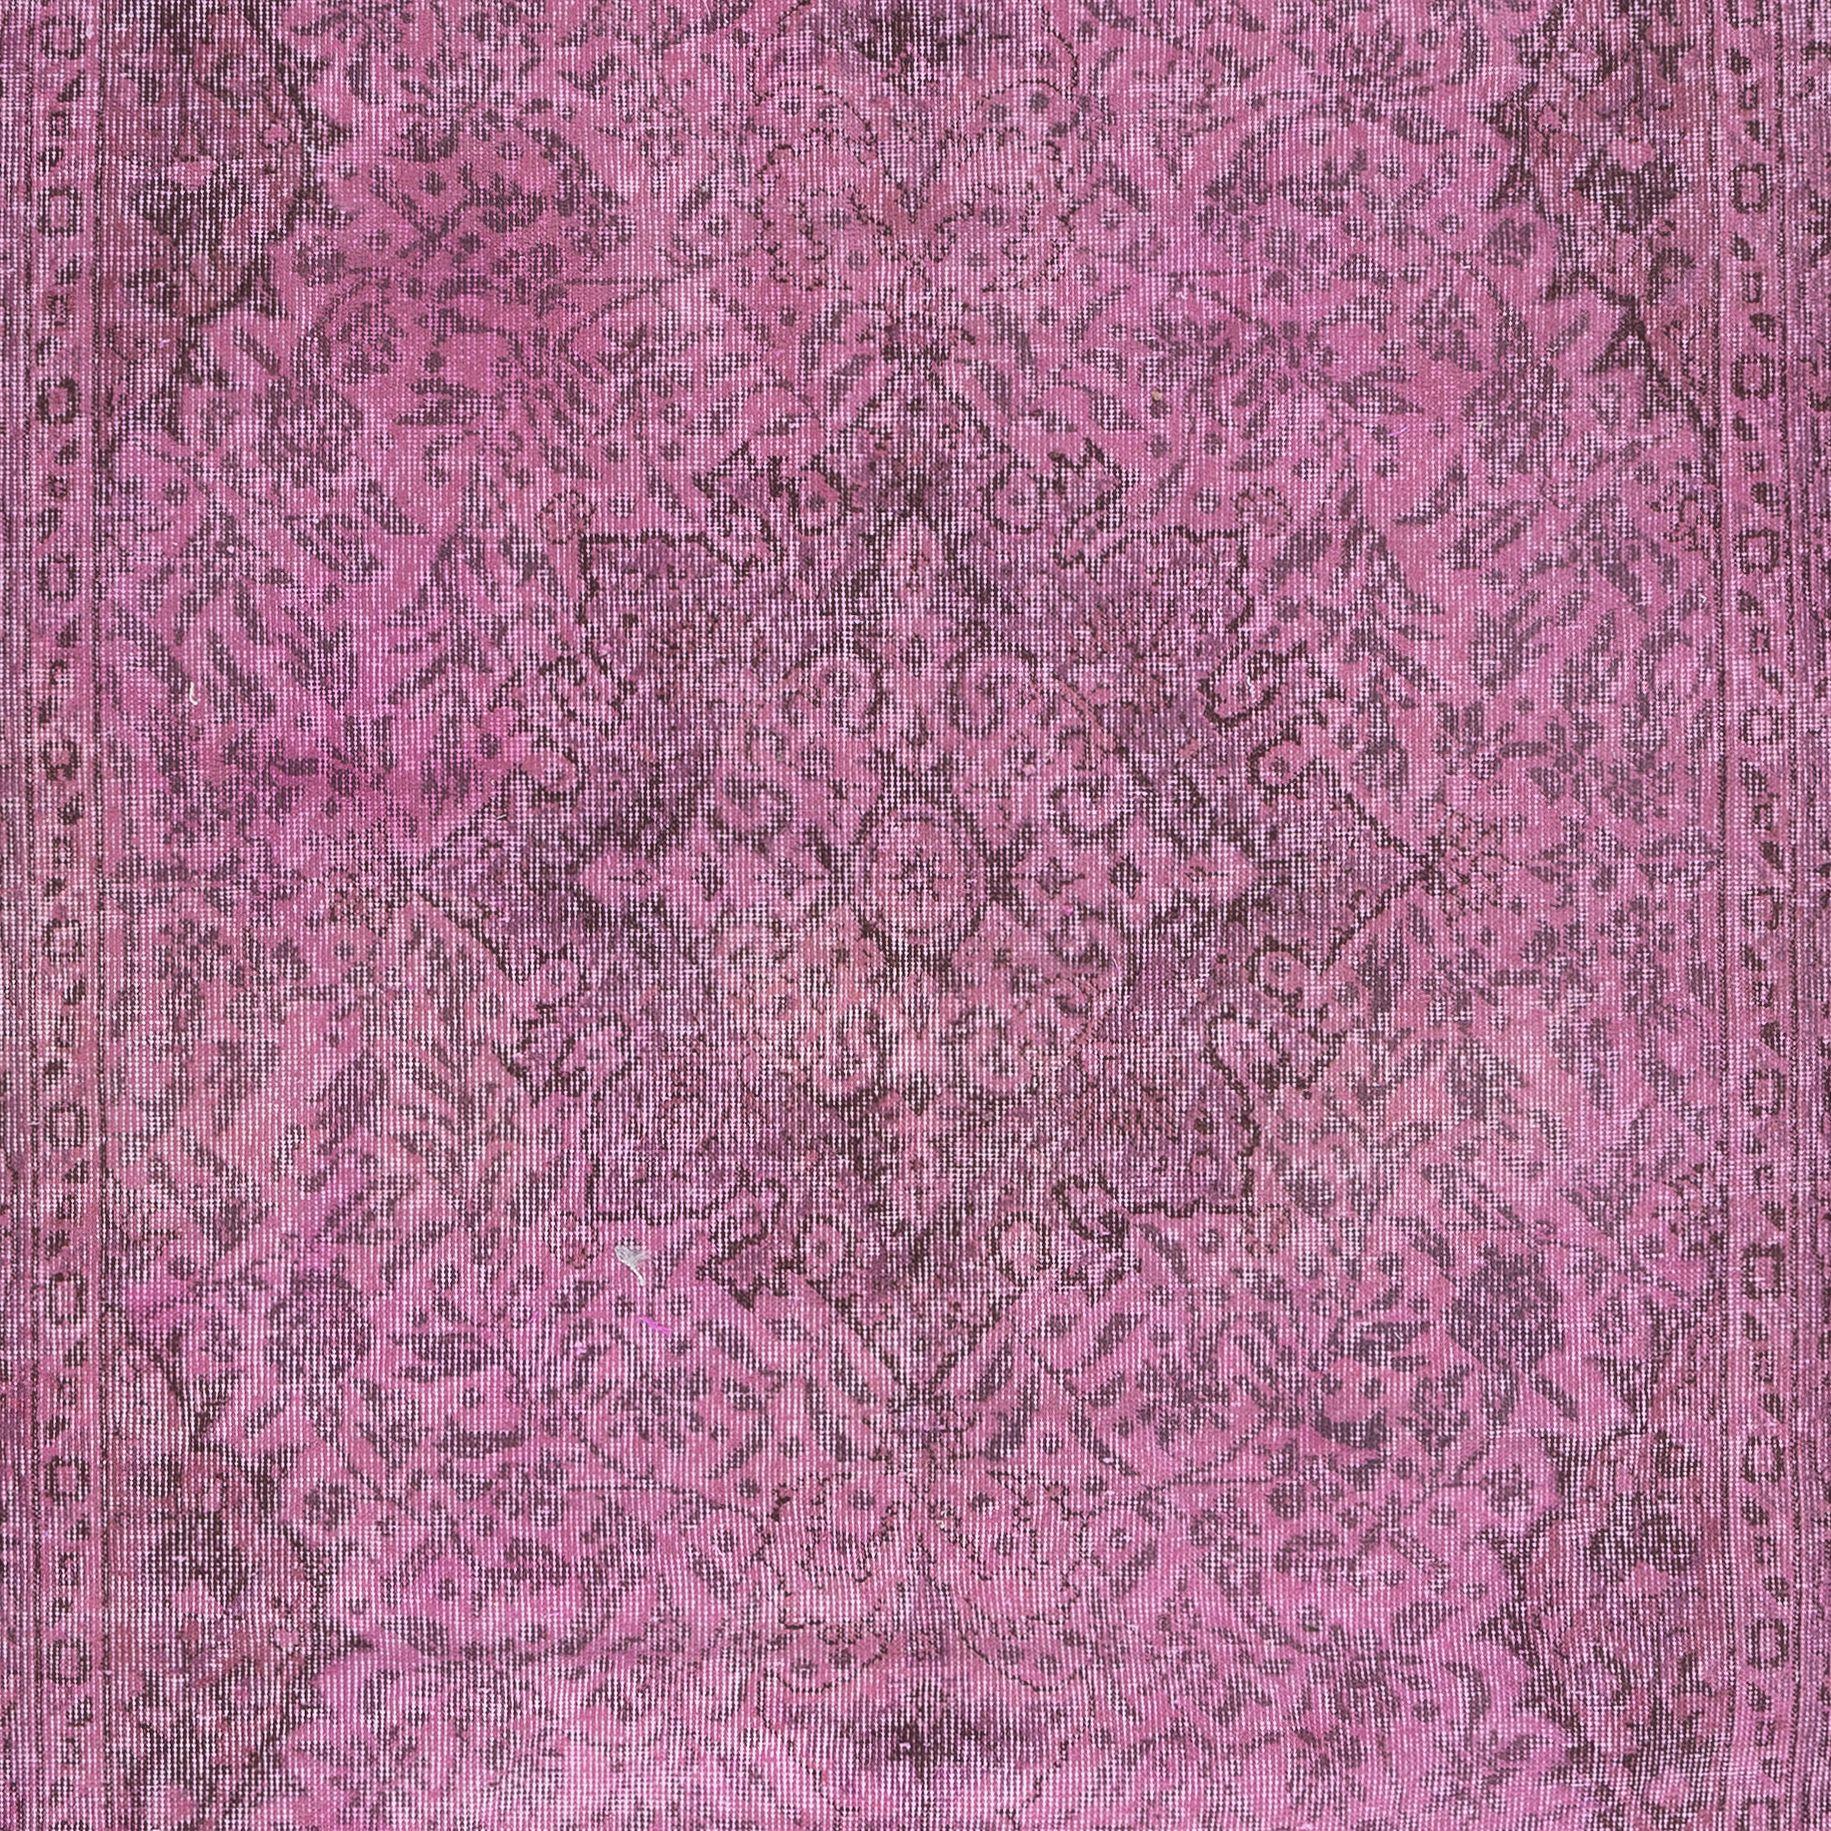 Turkish 5x8.7 Ft Modern Floor Area Rug in Pink, Handwoven and Handknotted in Turkey